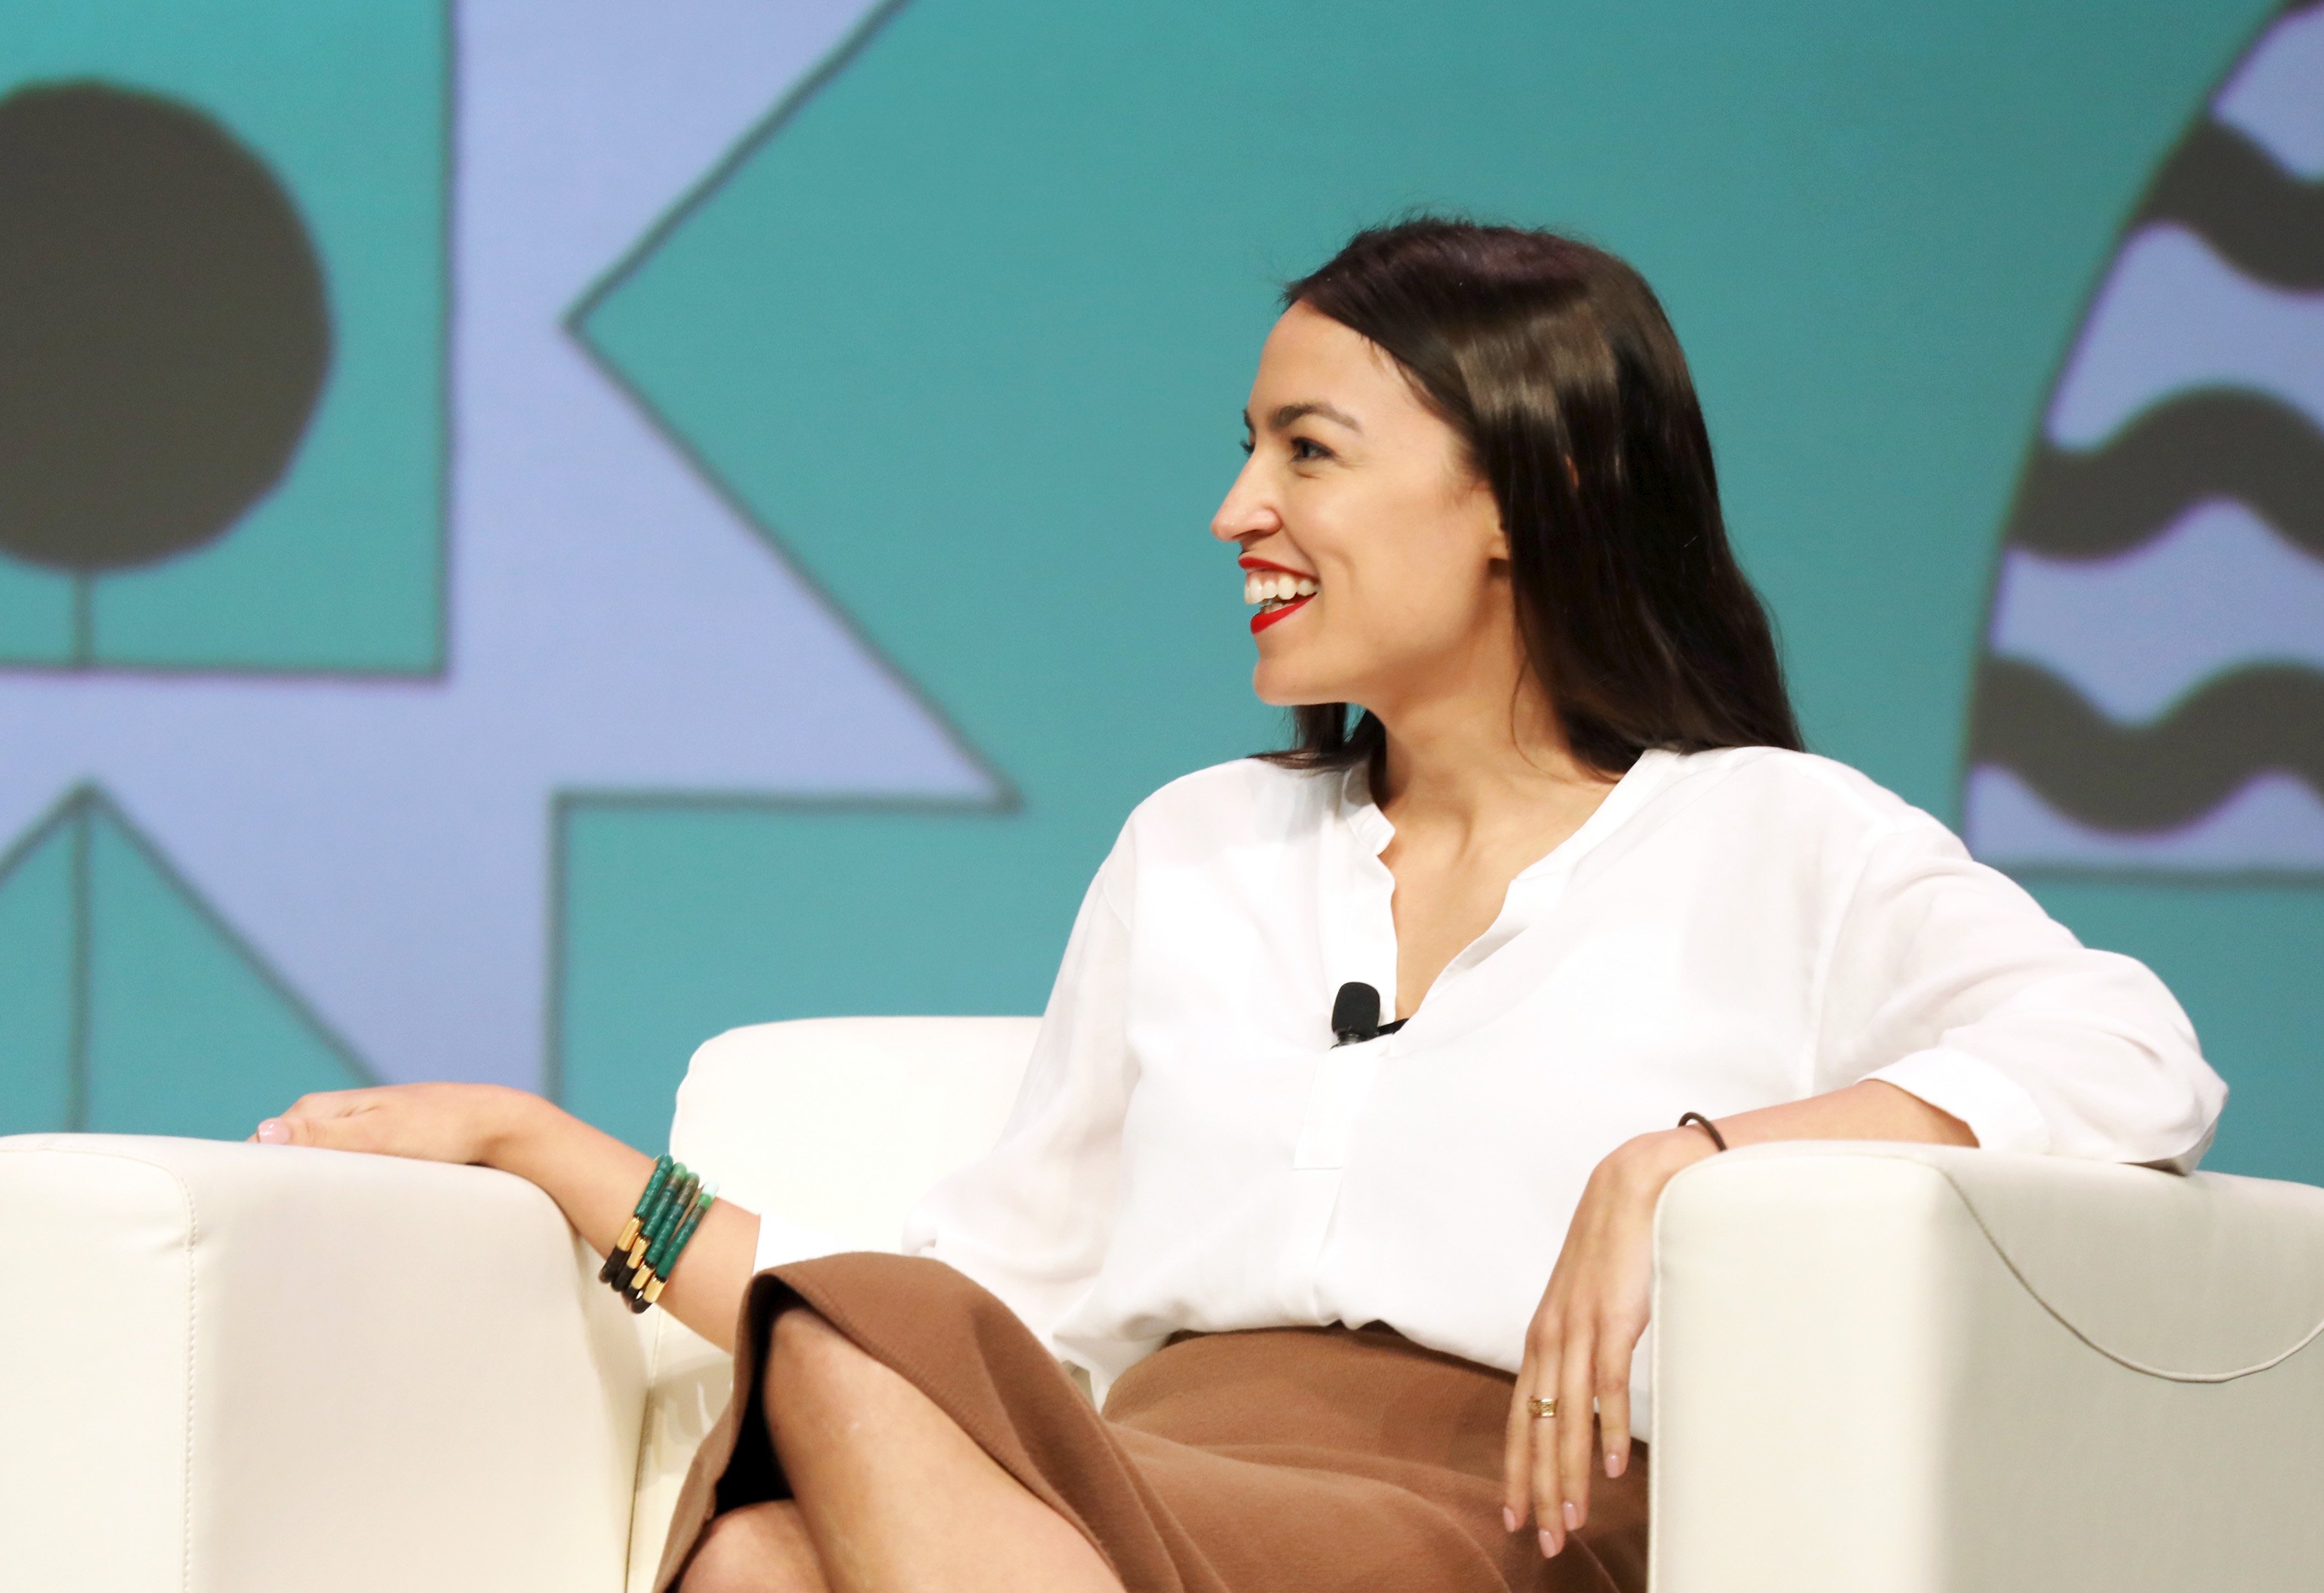 Alexandria Ocasio-Cortez sitting on stage at the 2019 SXSW Conference and Festivals in Austin, Texas | Photo: Getty Images